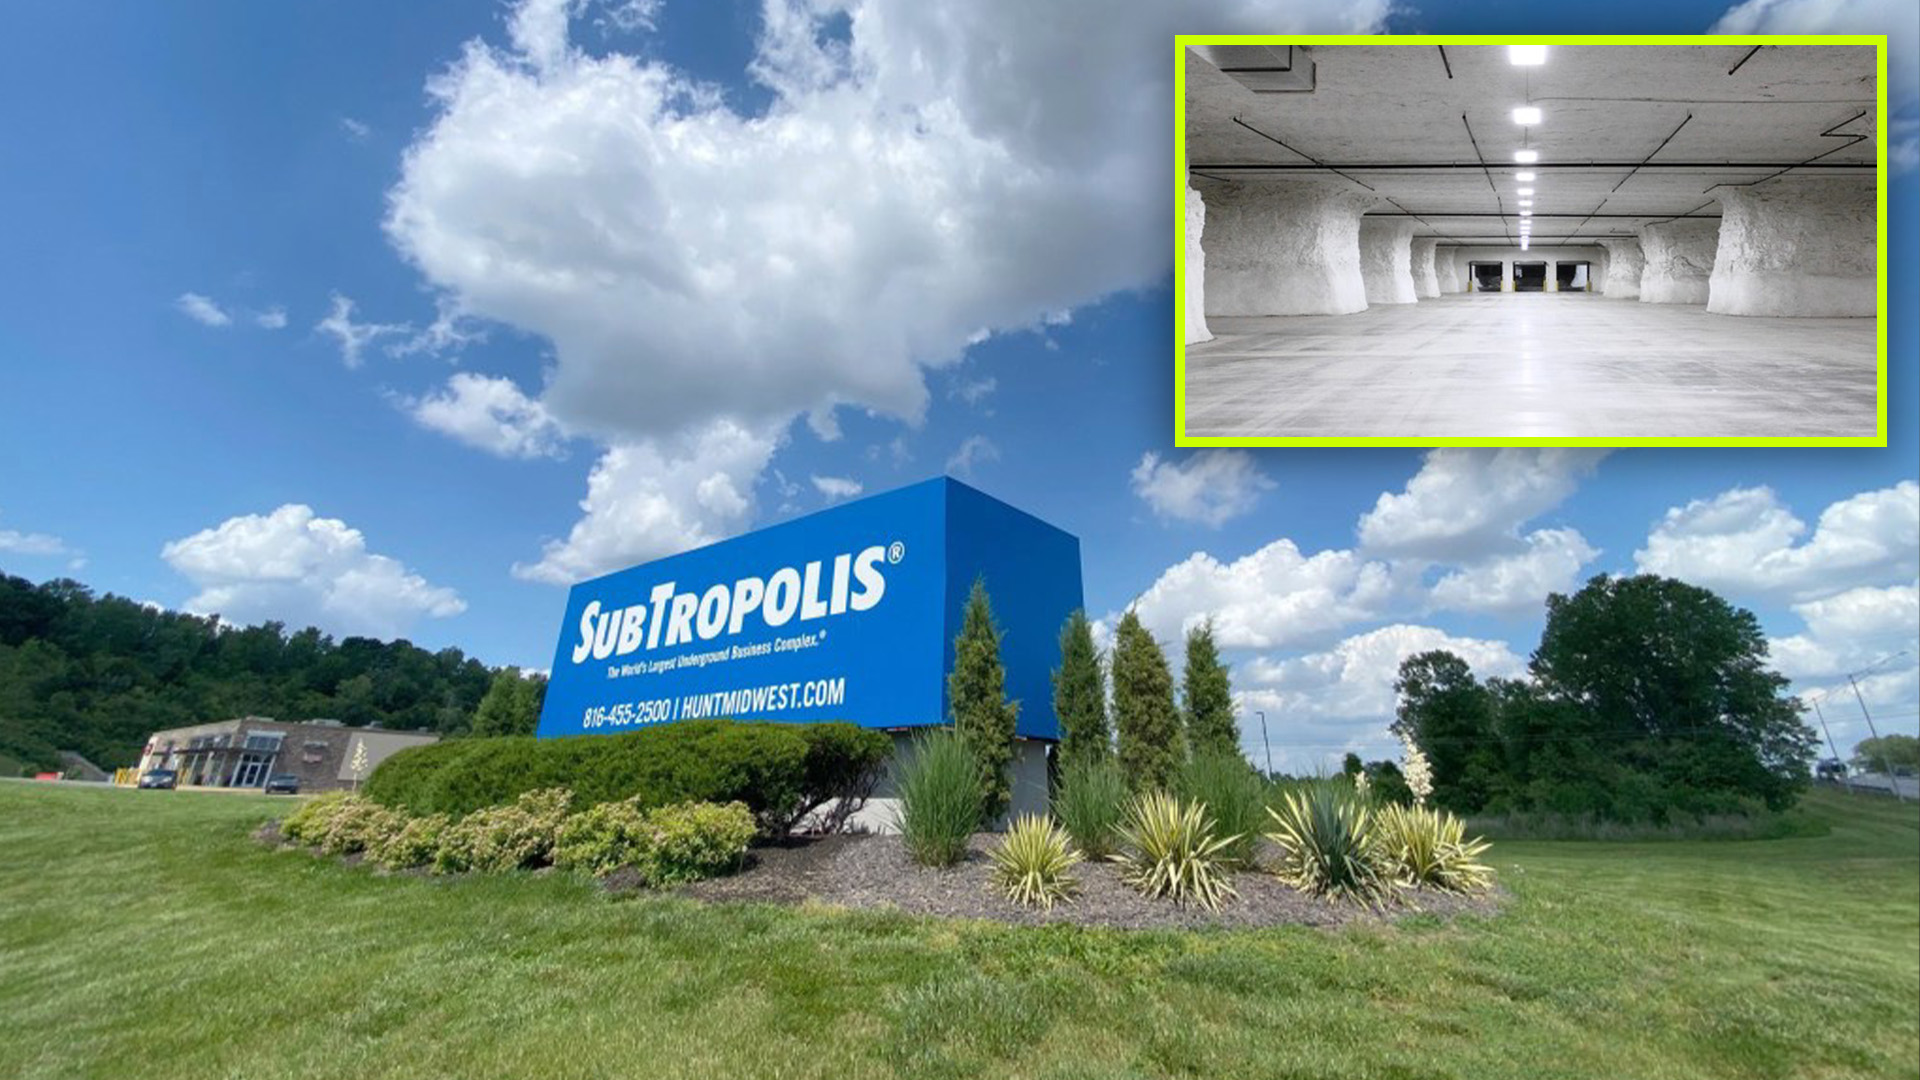 Have you ever heard about SubTropolis? A massive underground business facility in Kansas City, SubTropolis is the place where 1,600 people go to work every single day.